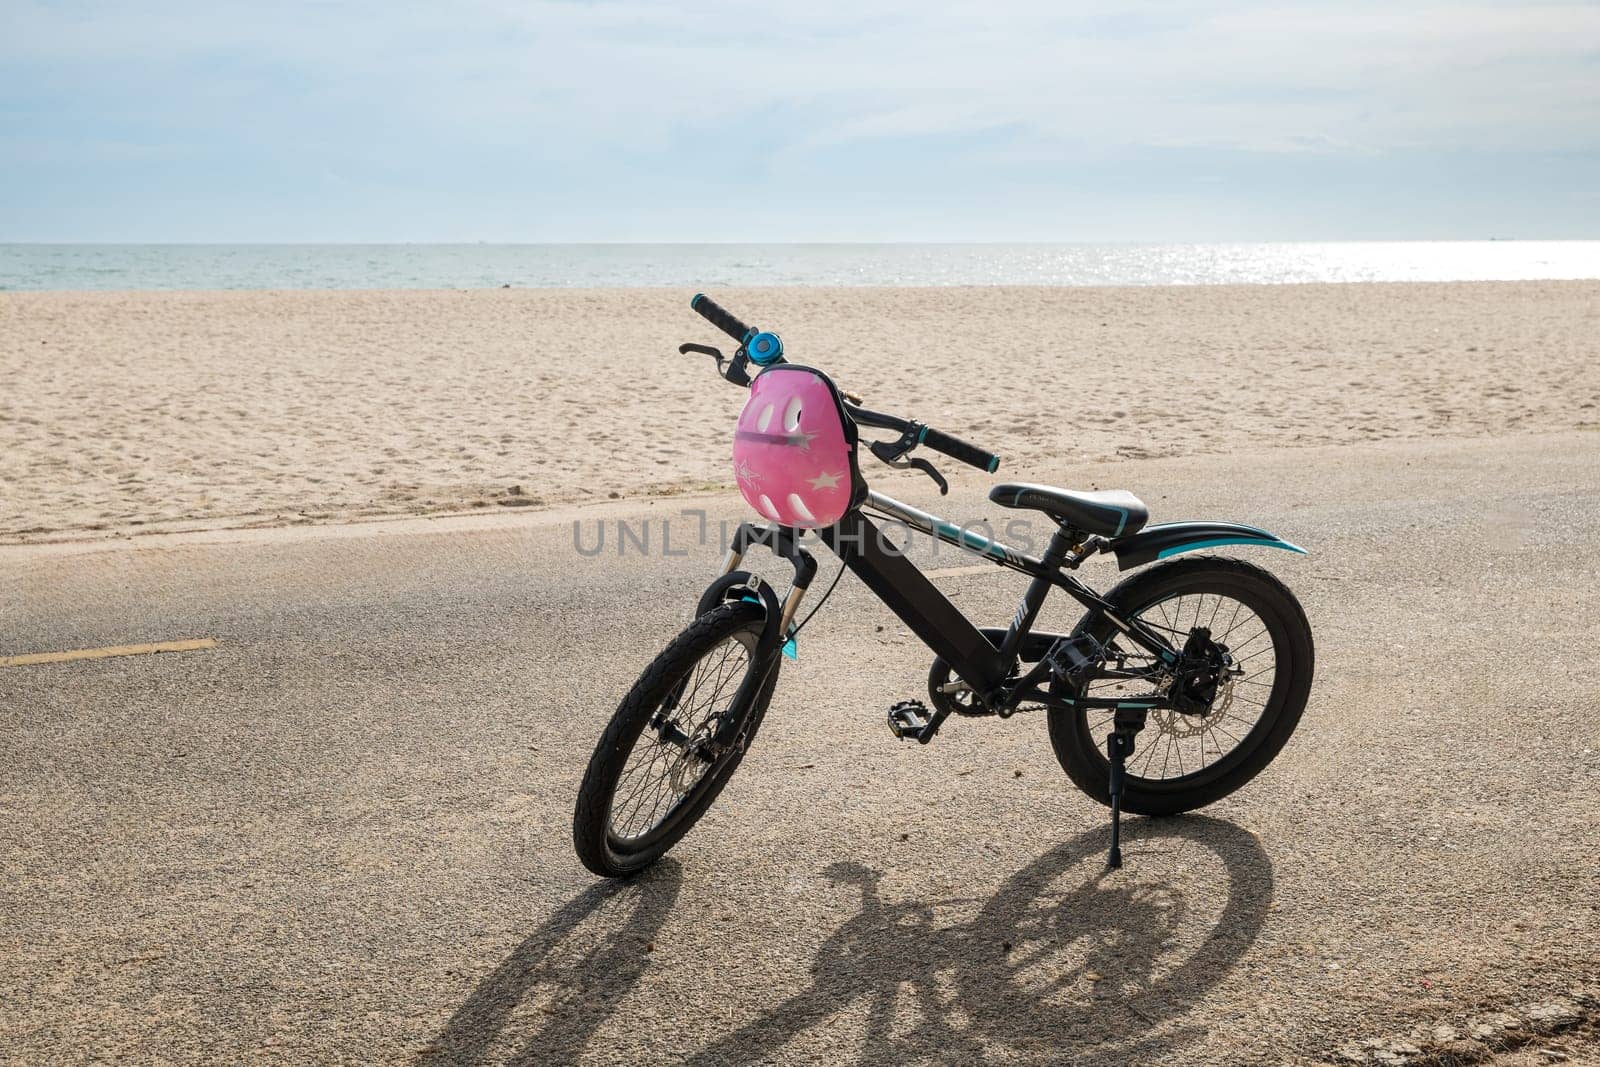 A tranquil summer day unfolds with a child's bicycle on a sandy beach capturing the carefree spirit of tourism where relaxation and sport meet against the backdrop of the sea and clear skies.